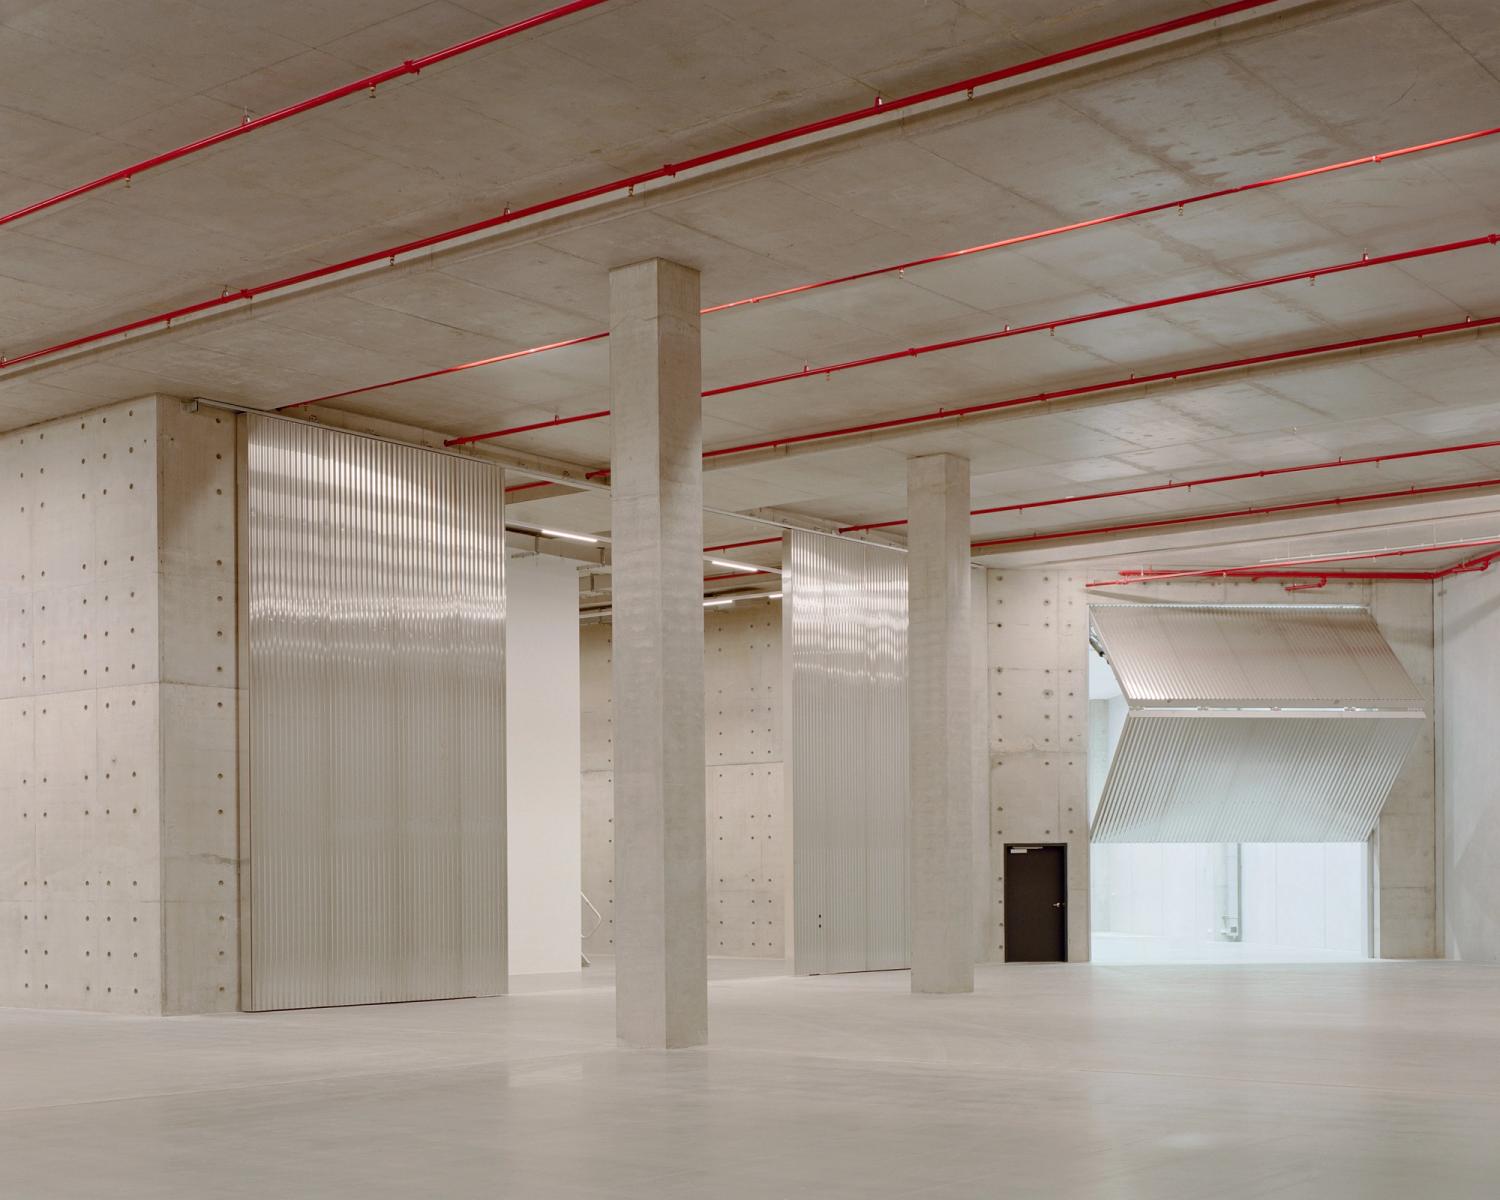 A huge concrete space with two large columns in the middle and a large folding door on the right.